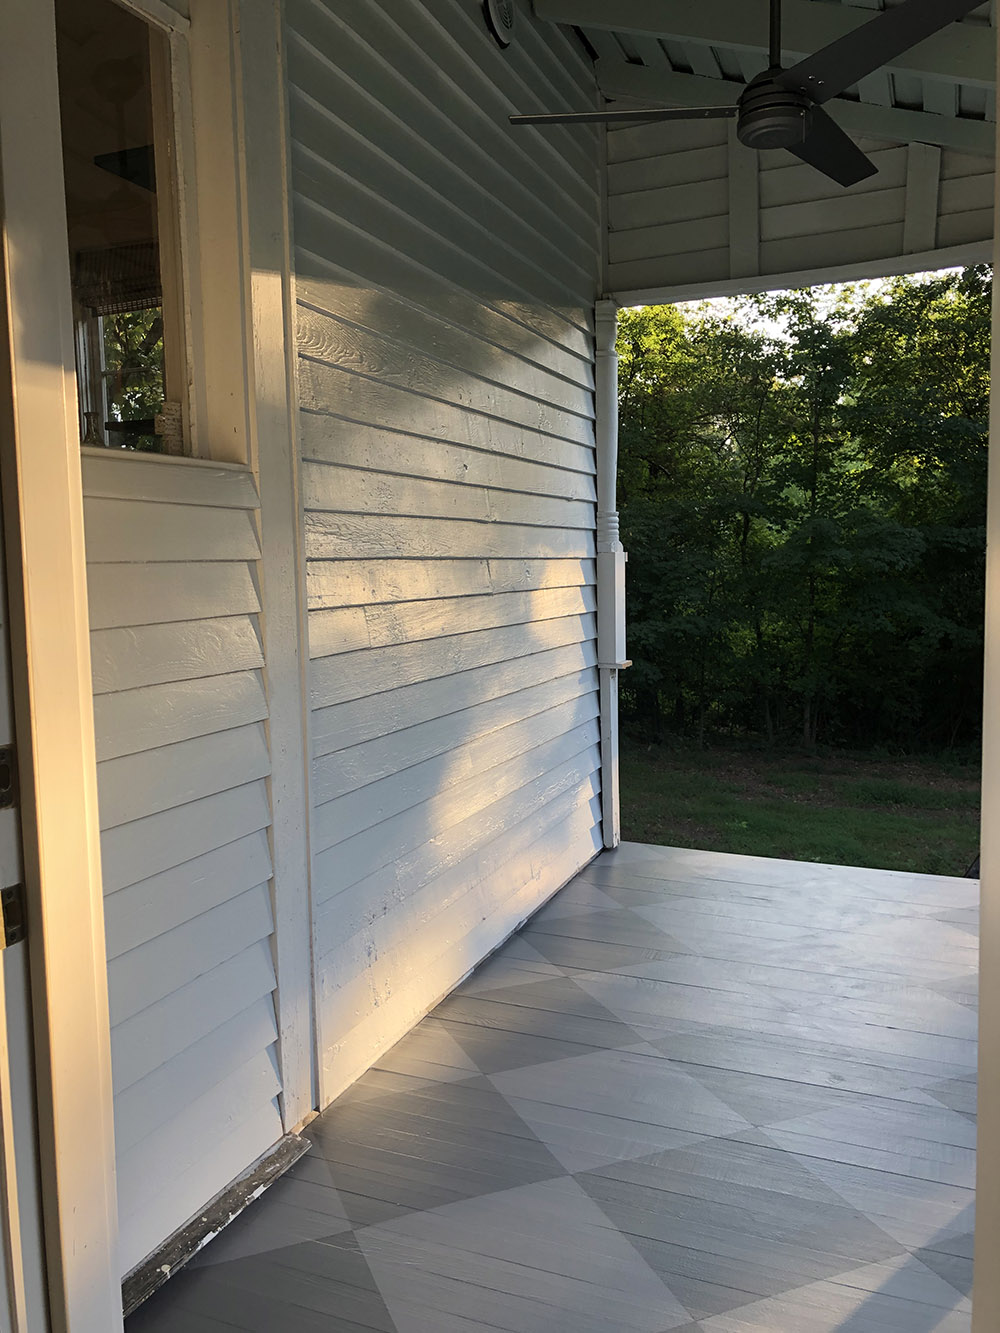 A porch floor painted in a diamond pattern with two shades of gray.